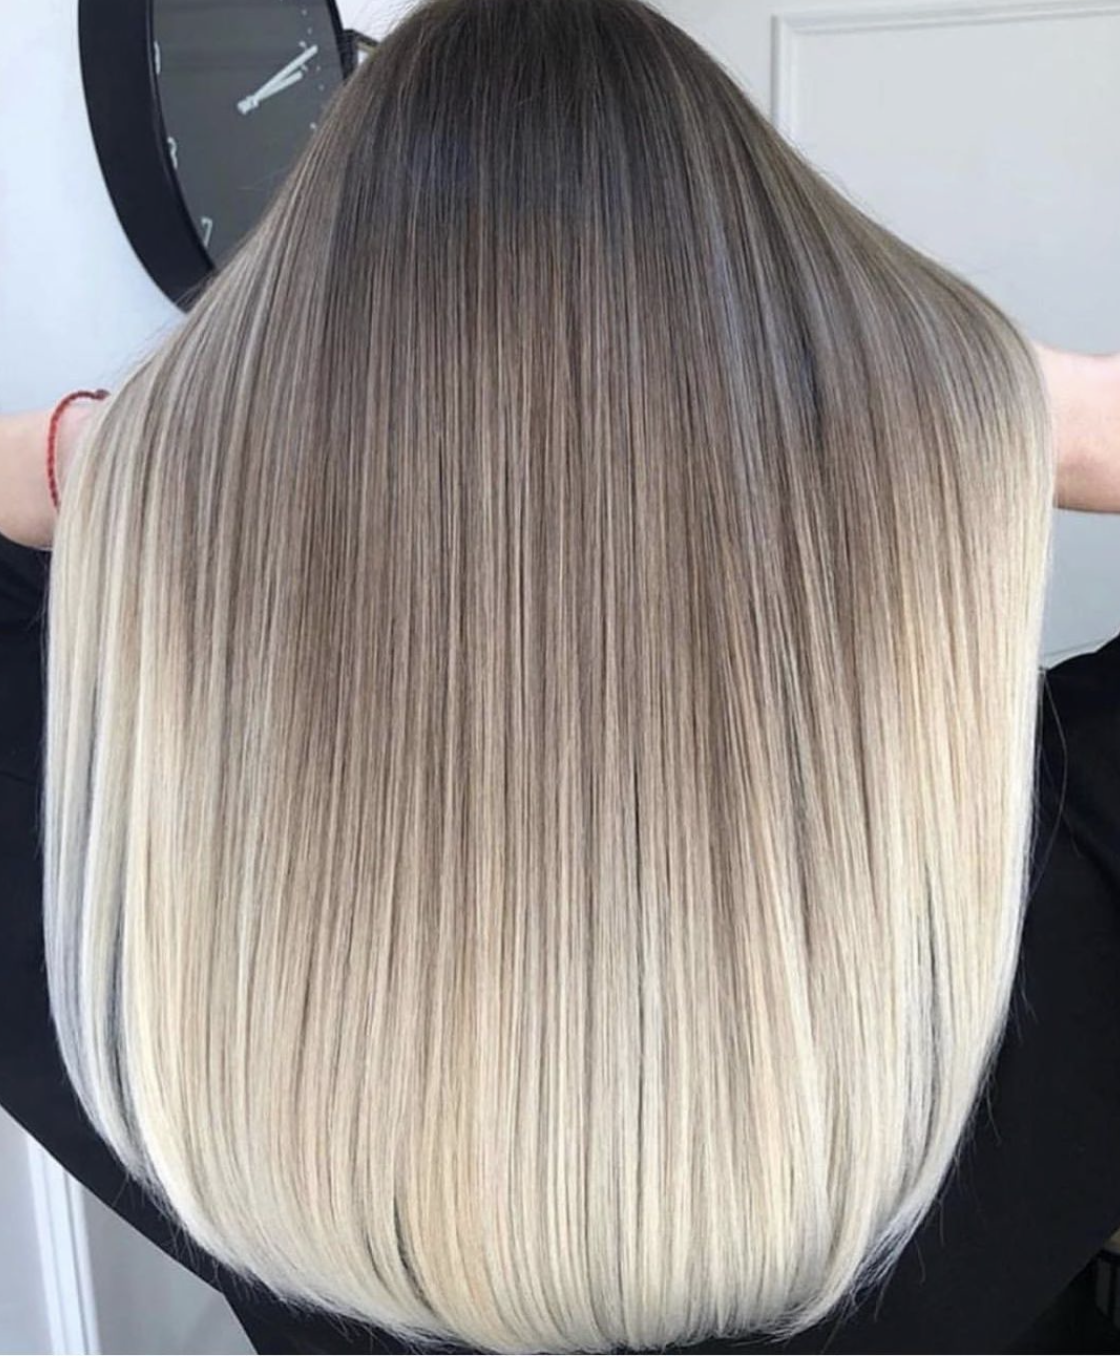 Count on our Miami Hair Stylists for Some of the Hottest Hair Trends